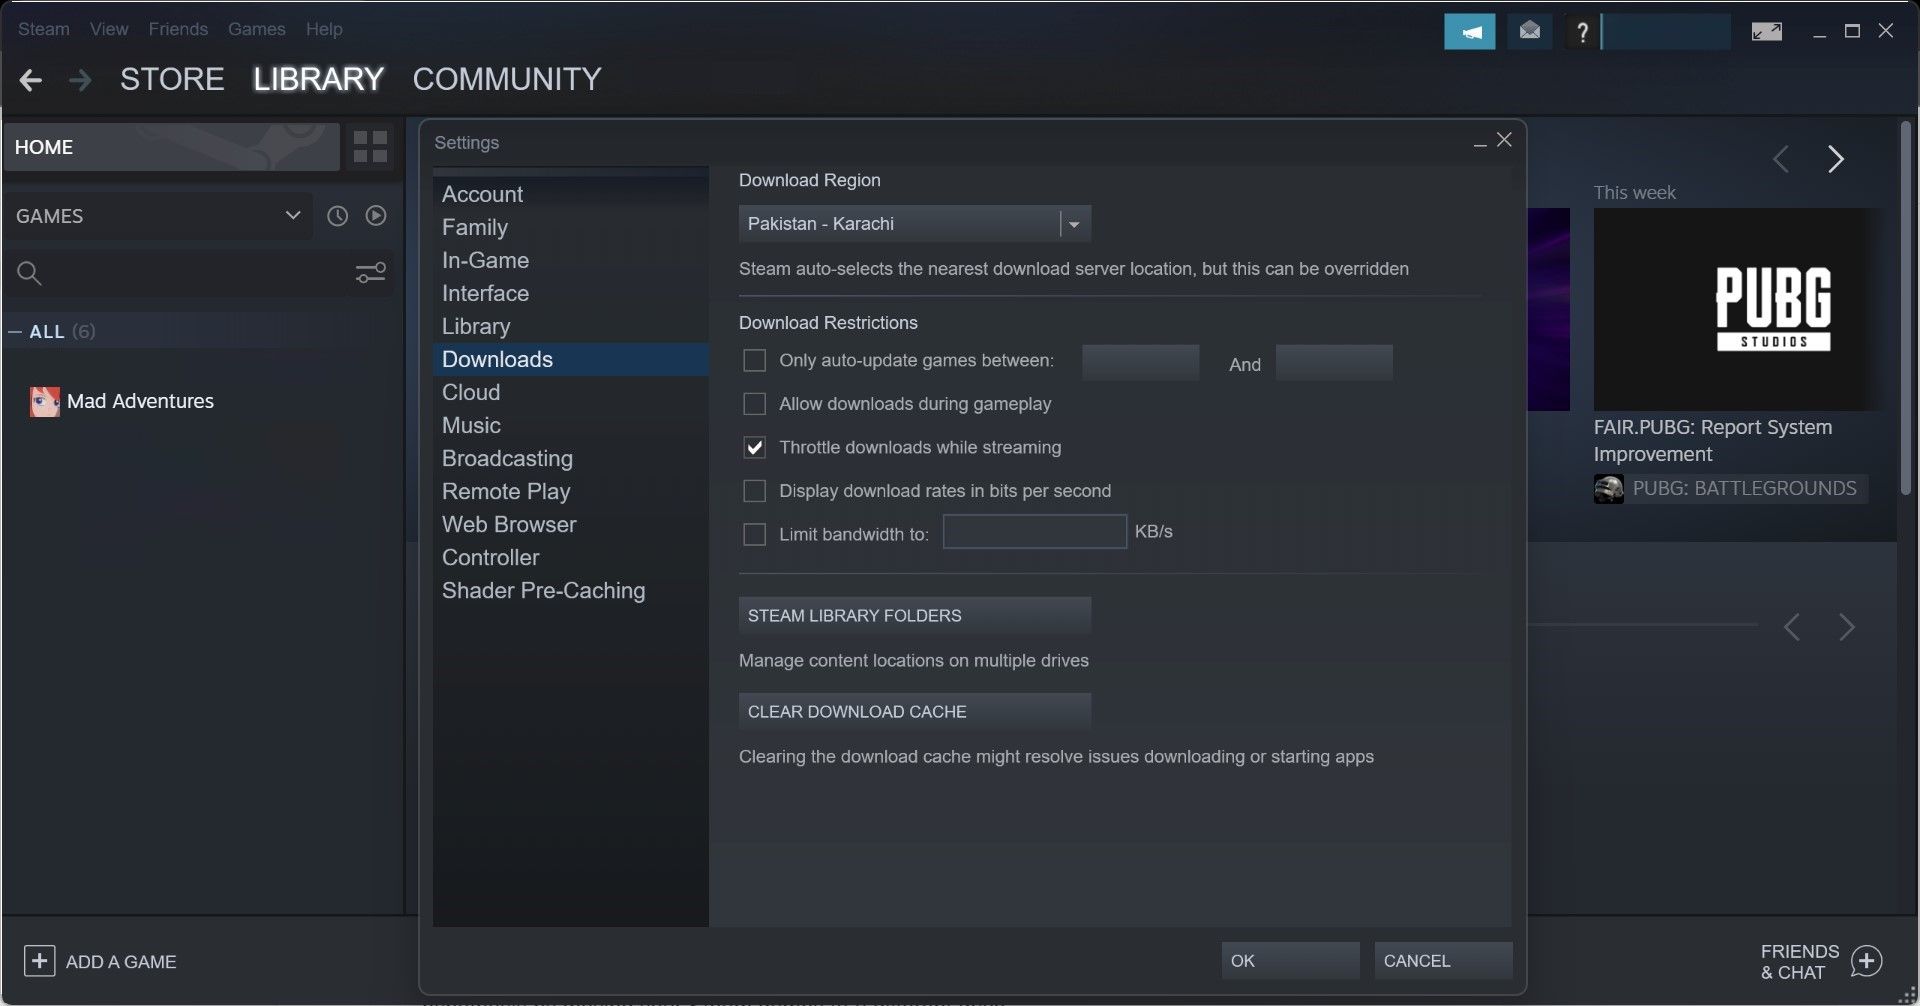 Clear the Download Cache in Steam Settings